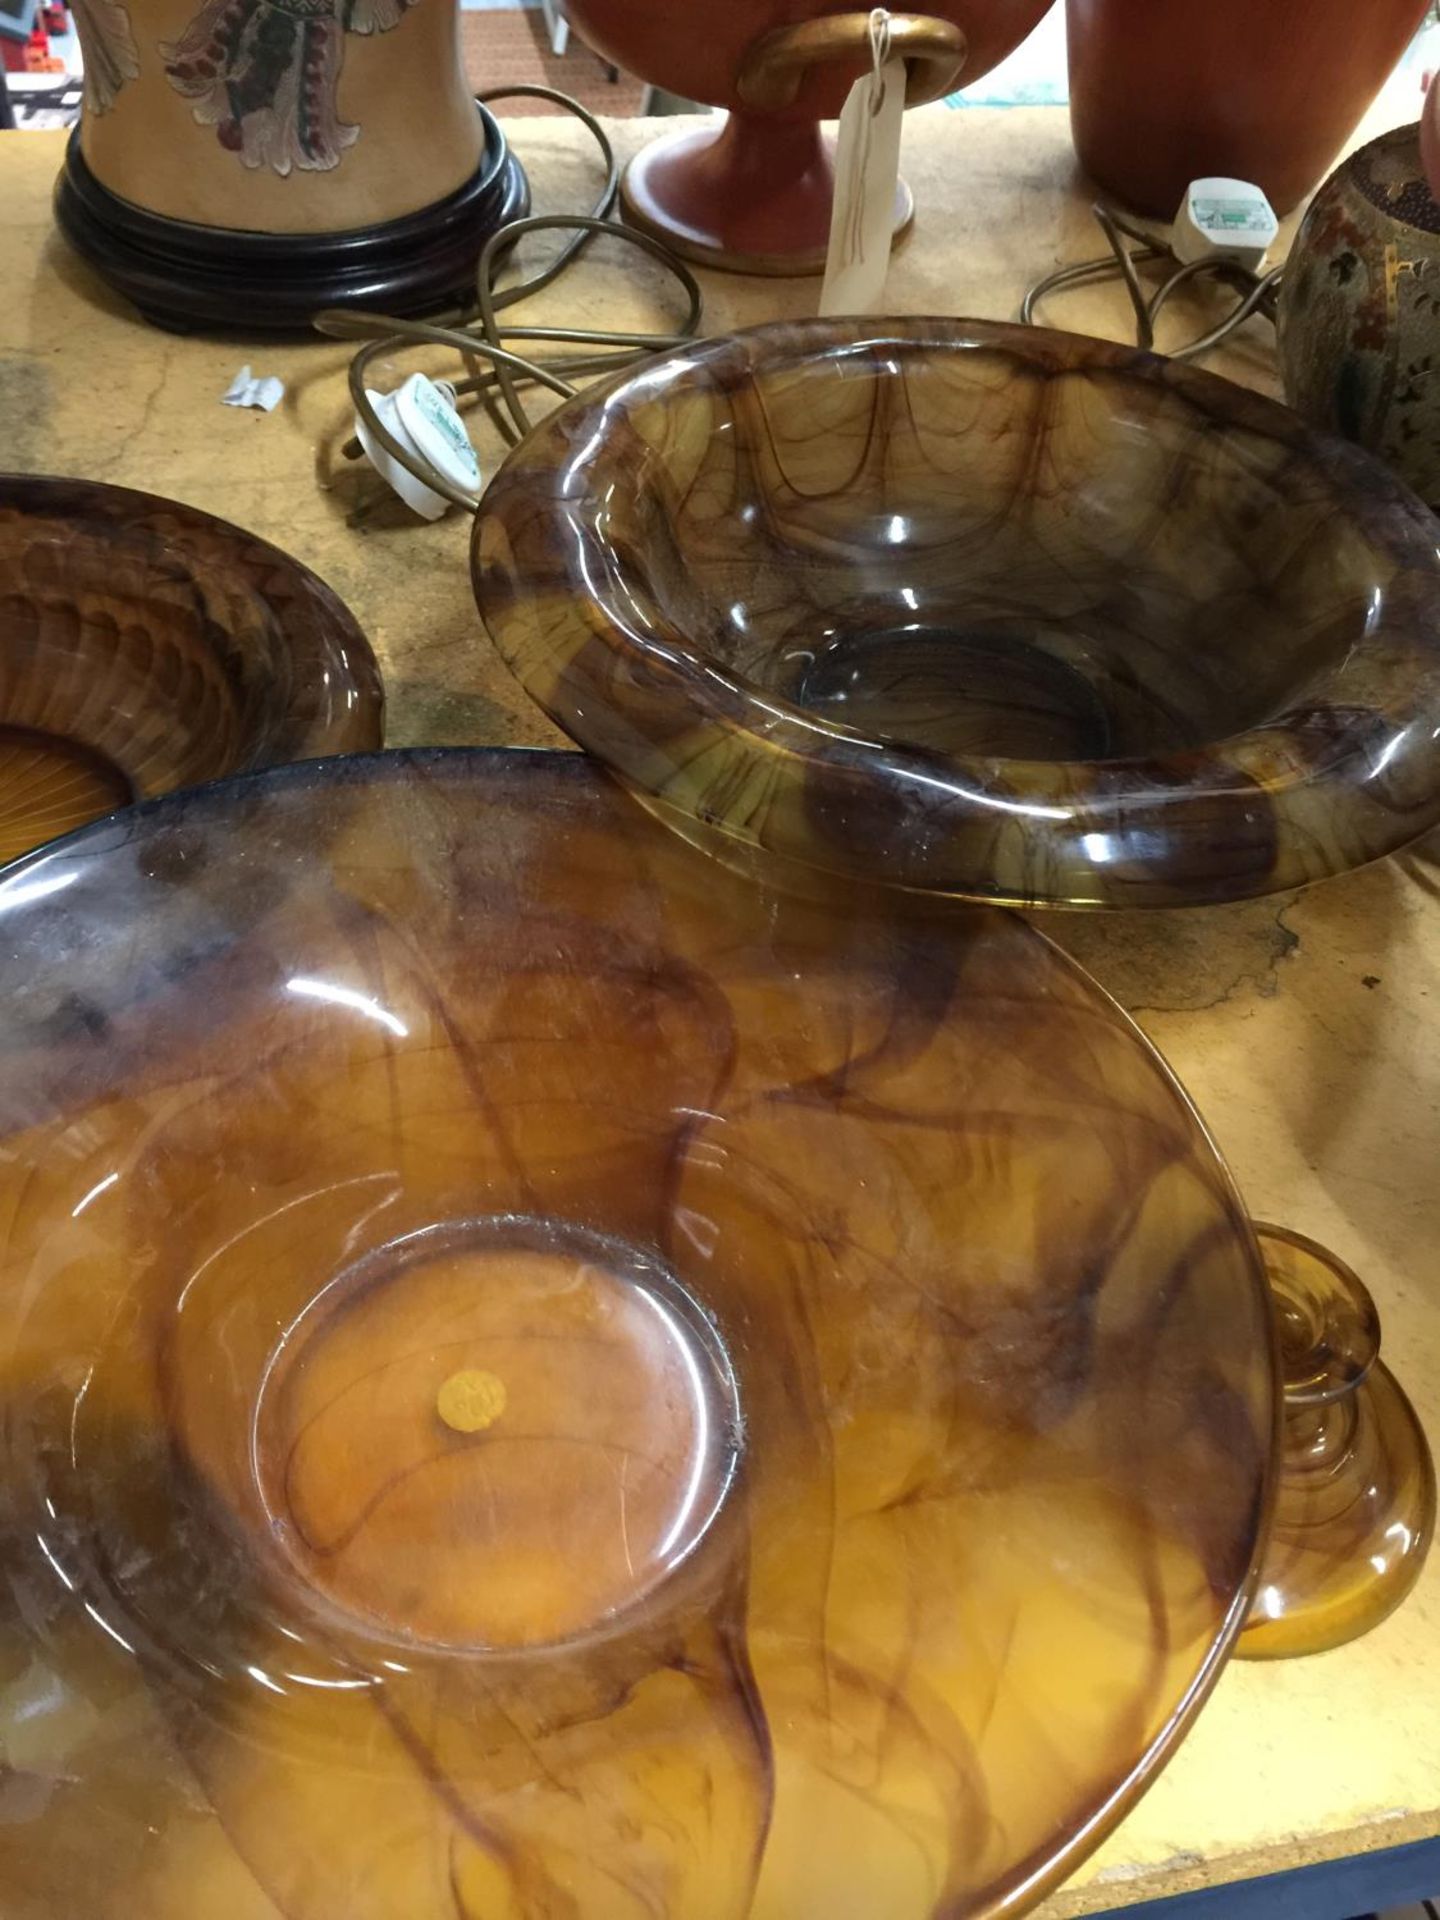 SIX PIECES OF AMBER CLOUD GLASS TO INCLUDE BOWLS AND CANDLESTICKS - Image 2 of 3